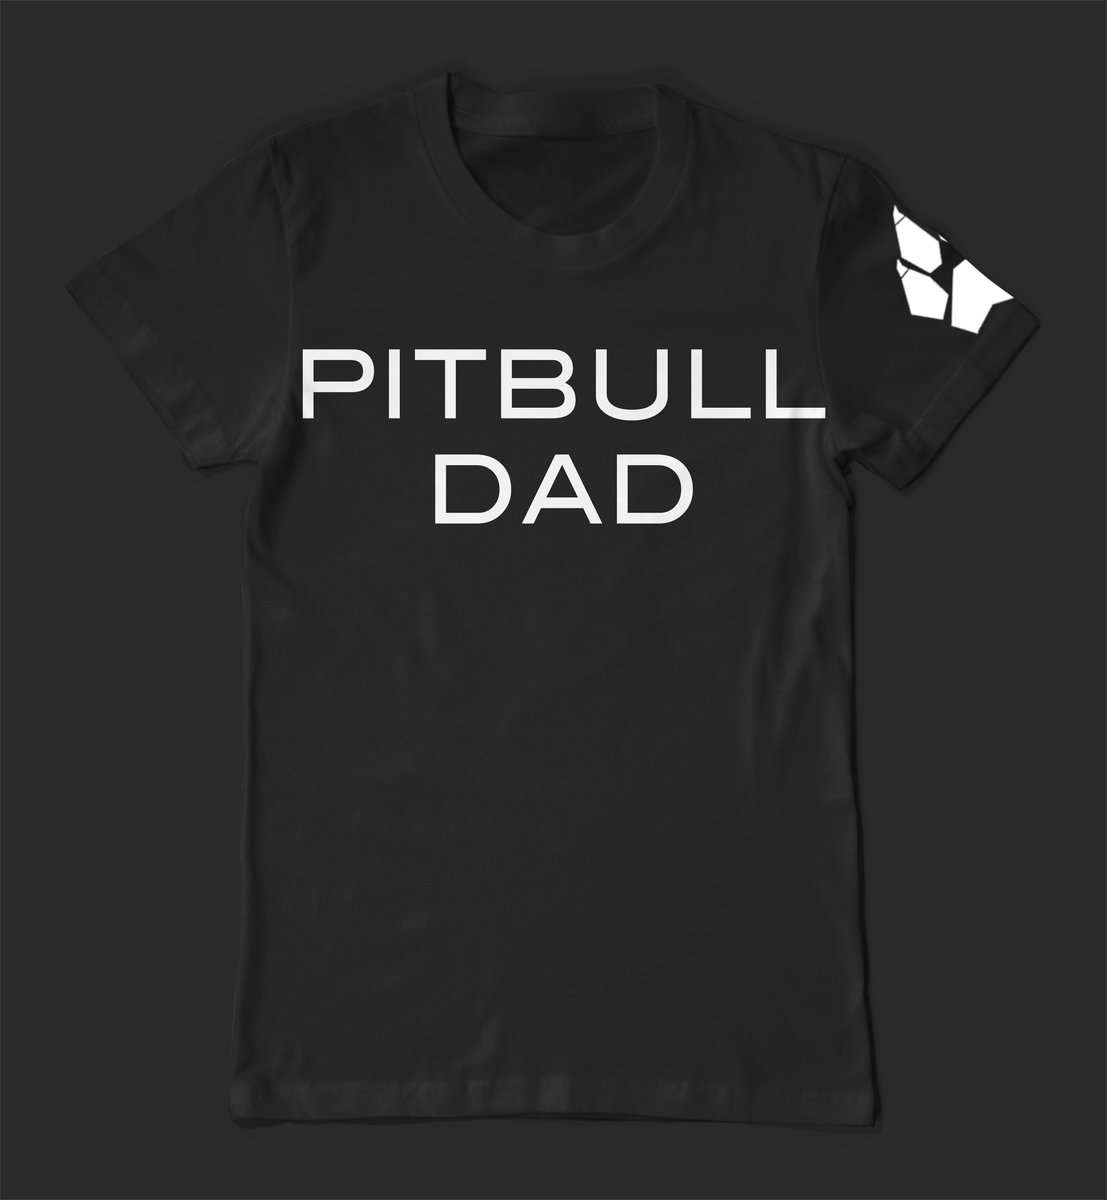 KAE-O Clothing – Pit Bull Advocacy Men's and Women's Tees, Hoodies, Bottoms  and More Supporting Pit Bull Awareness